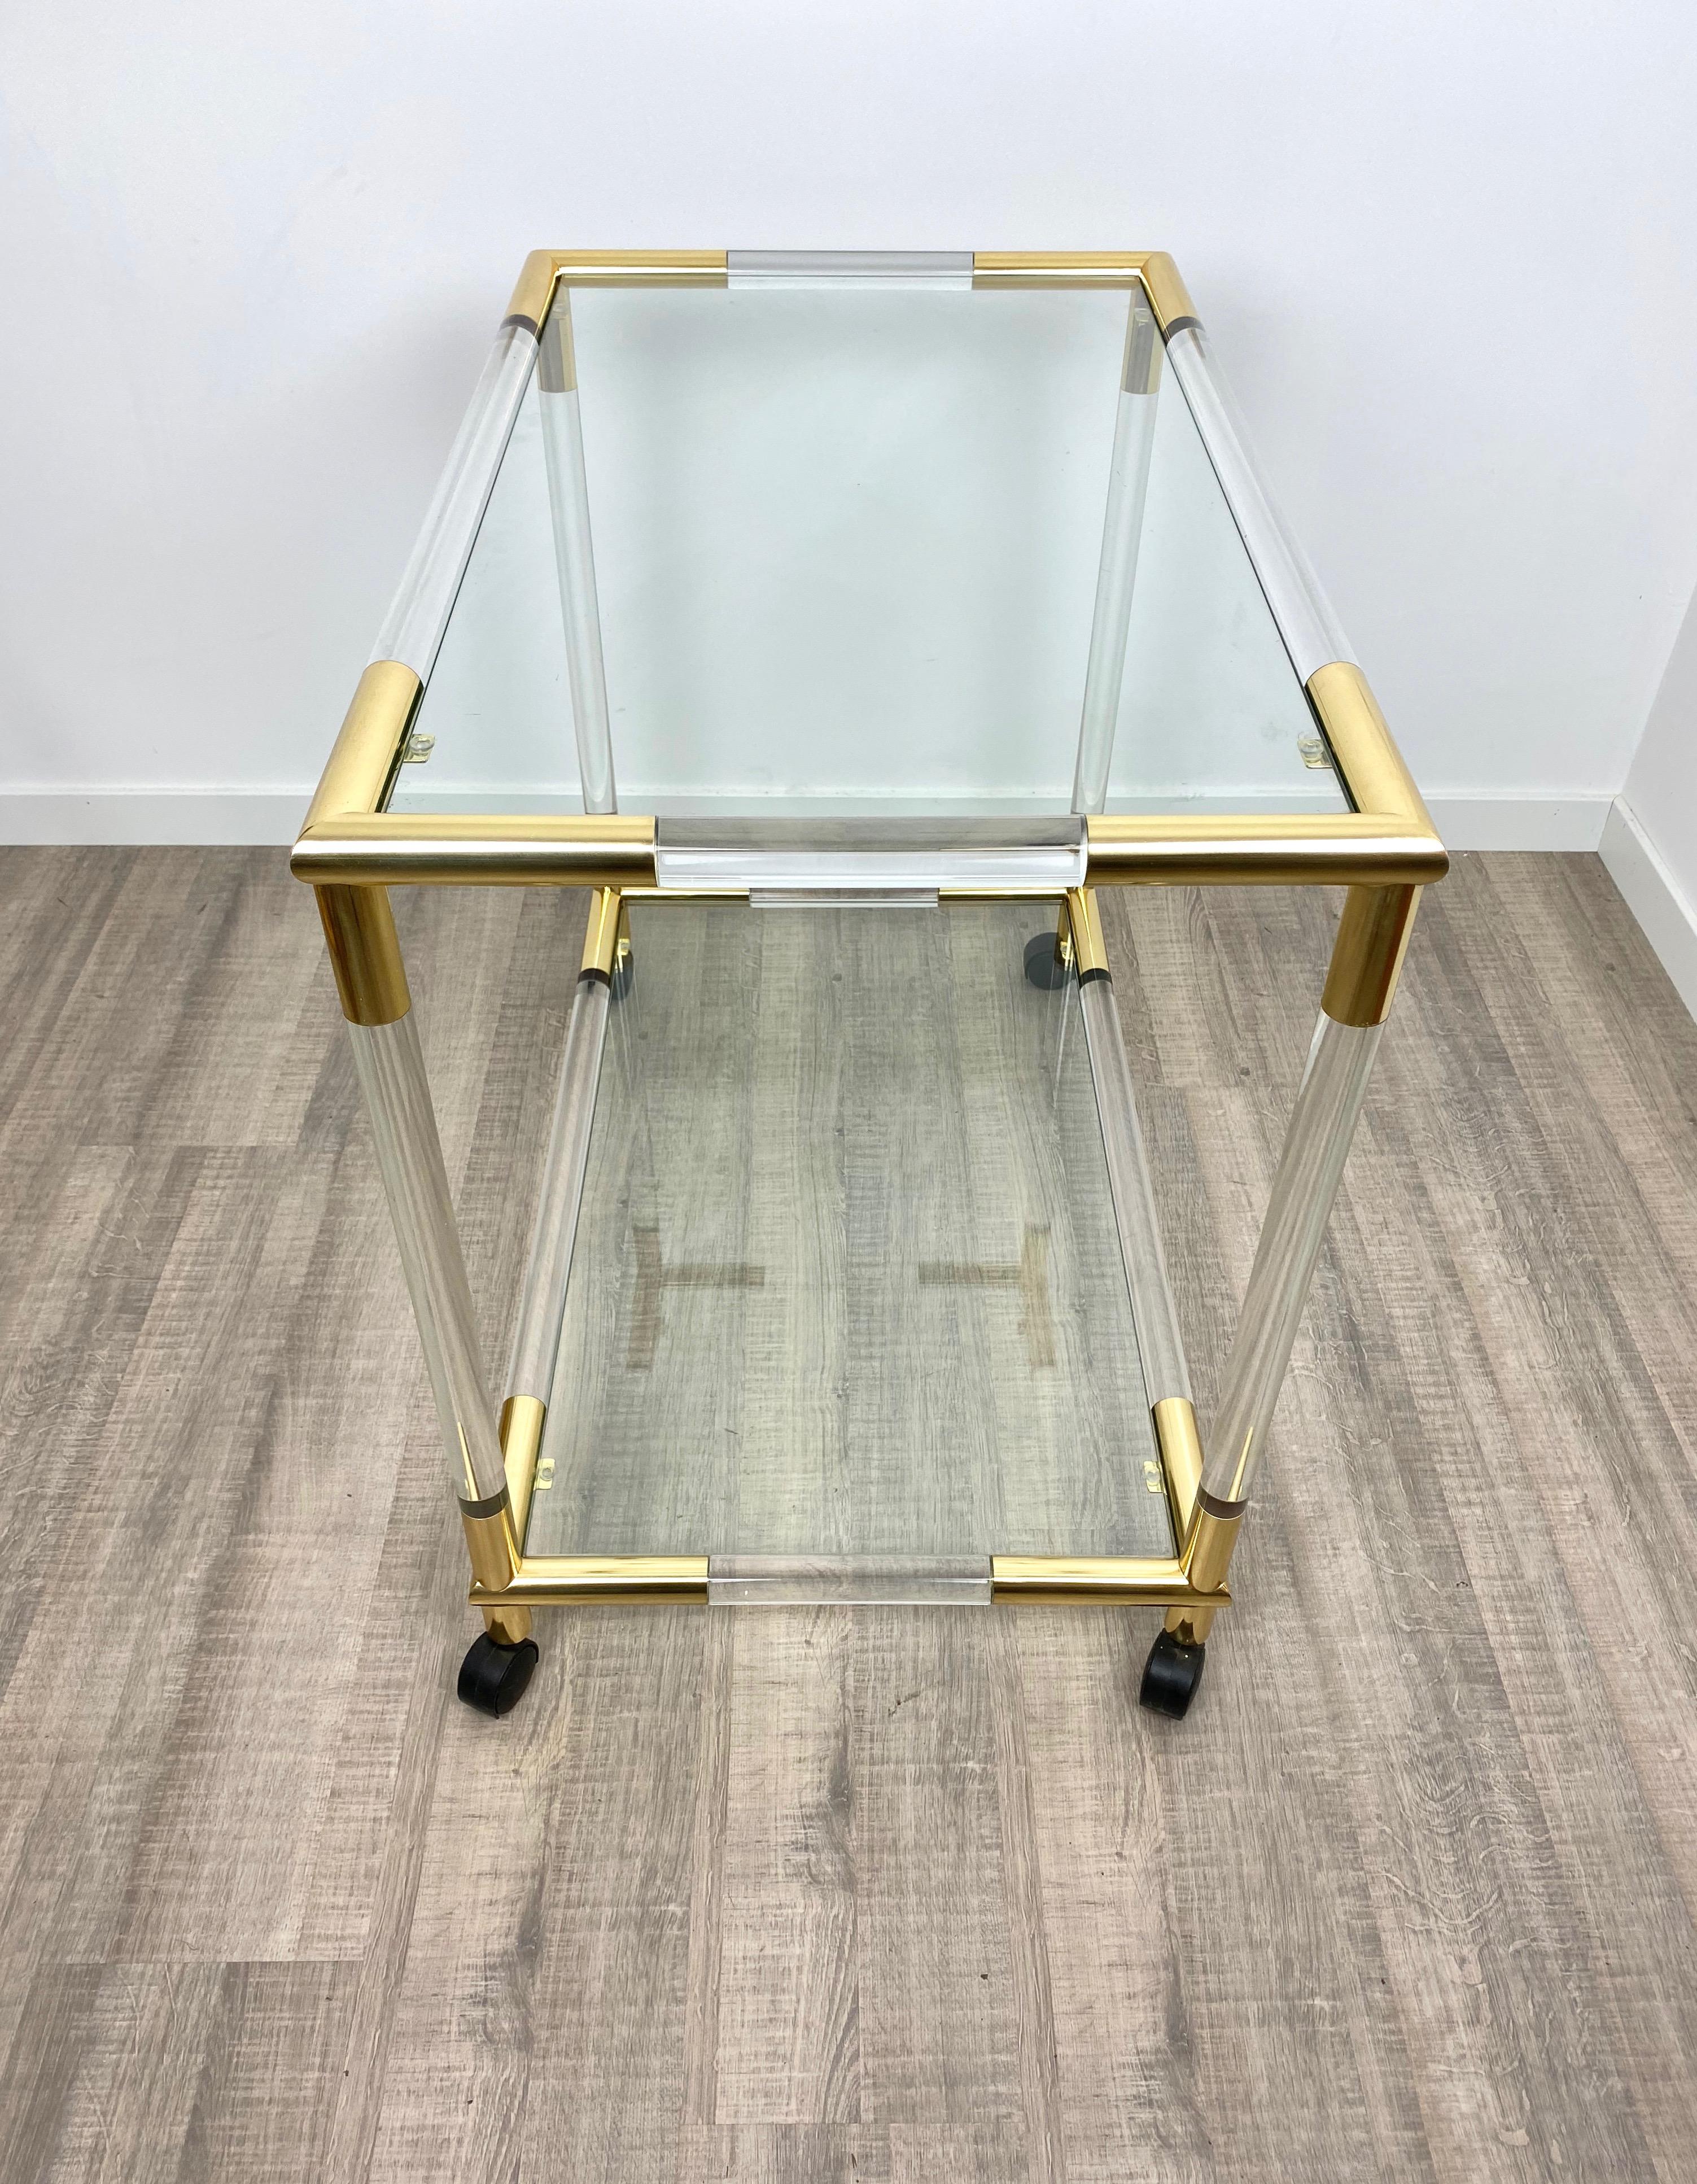 Late 20th Century Lucite, Brass and Glass Bar Serving Cart Trolley, Italy, 1970s For Sale